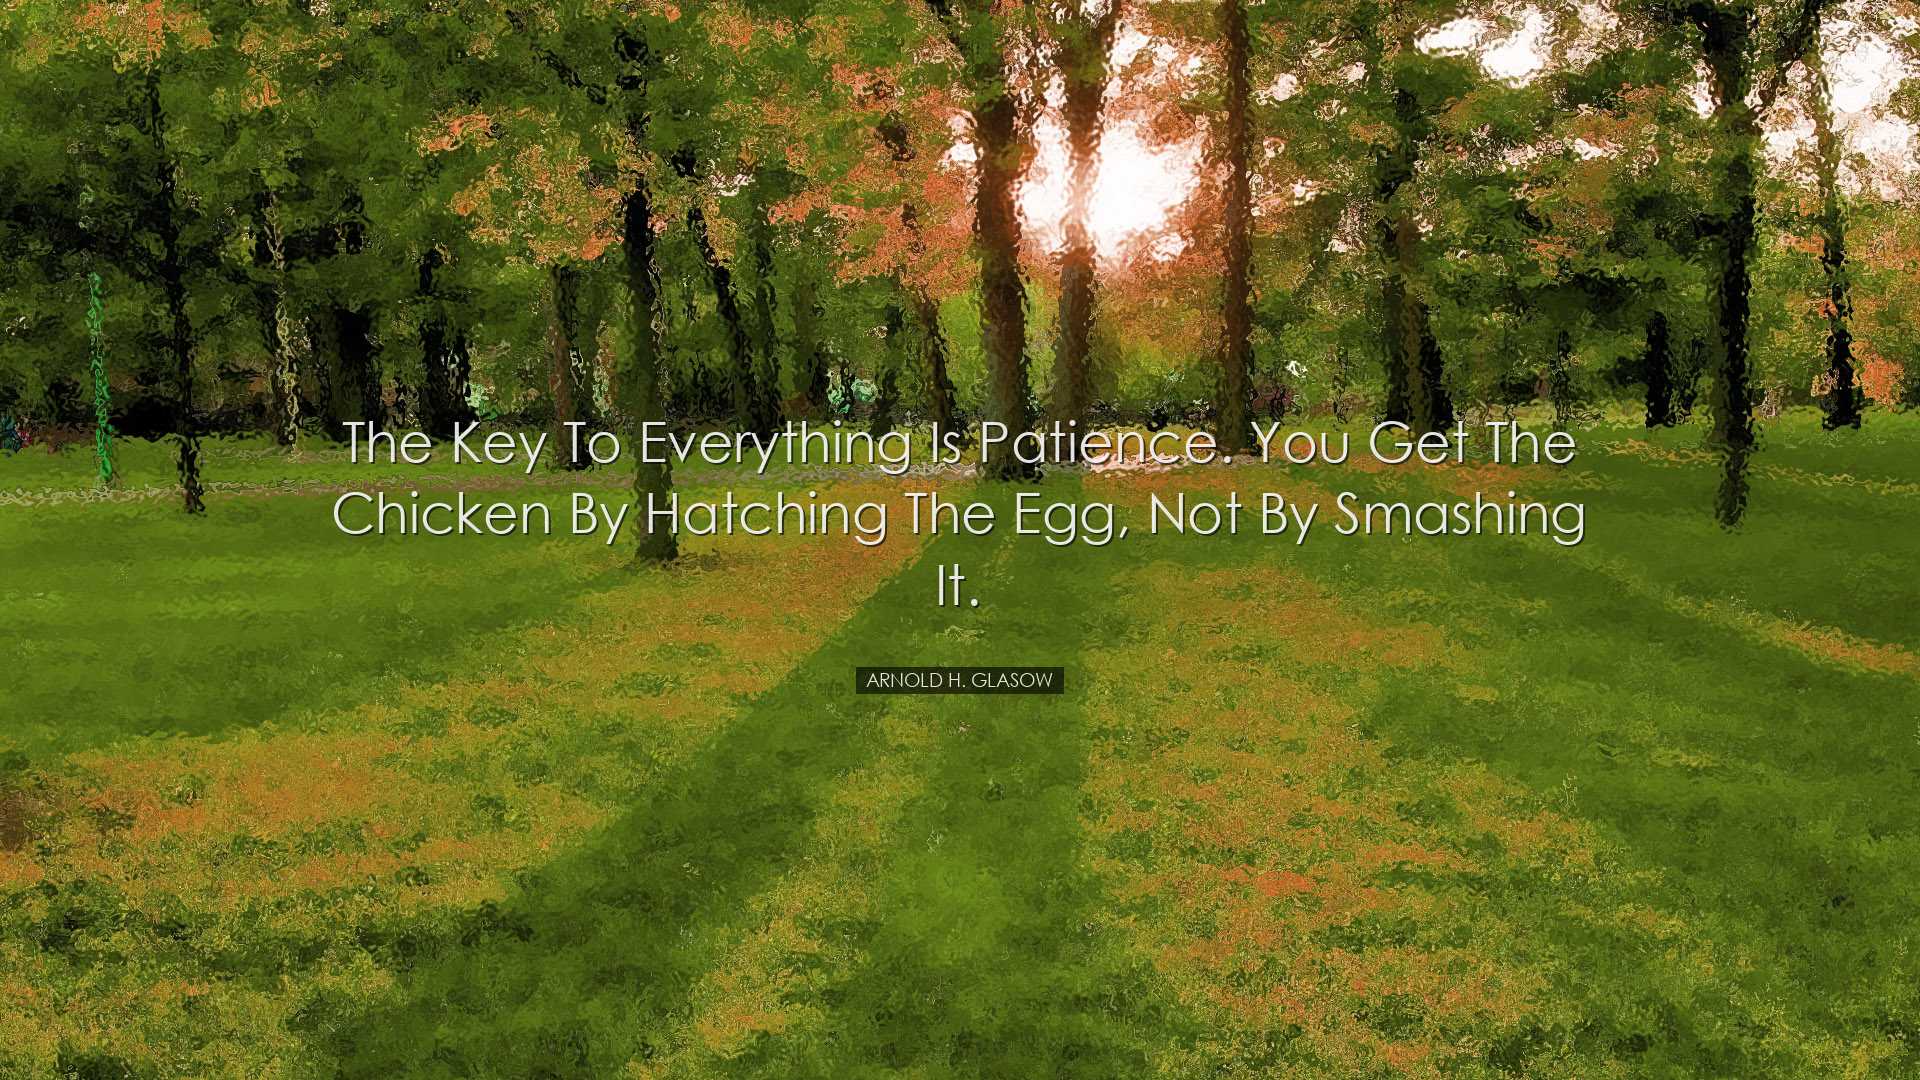 The key to everything is patience. You get the chicken by hatching